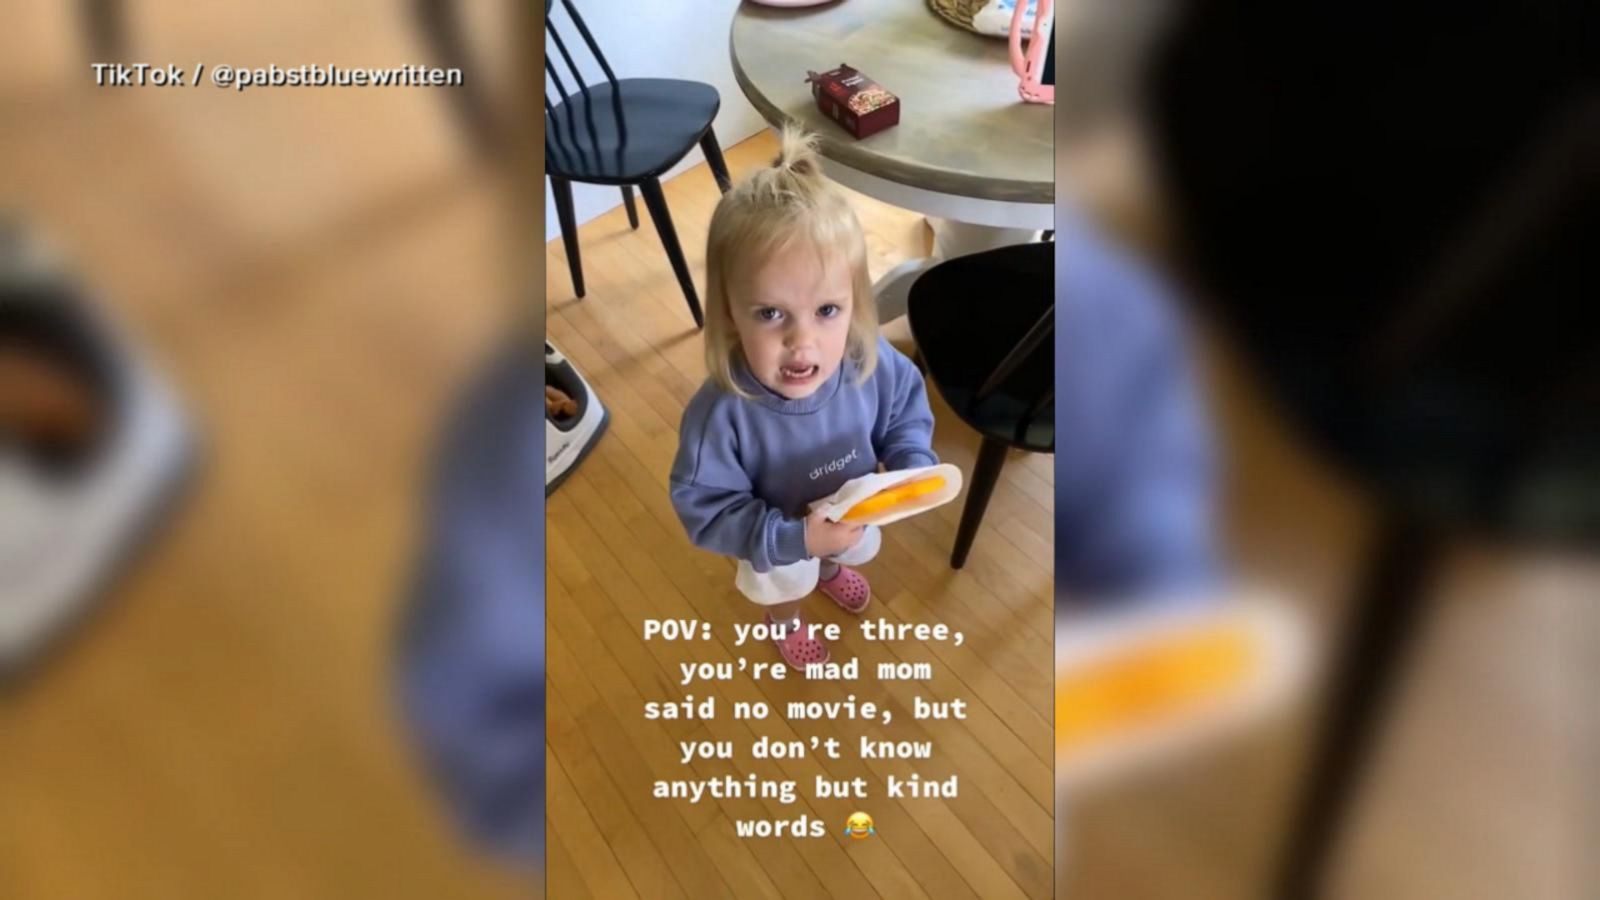 Child's tantrum gets nearly two and a half million views on TikTok